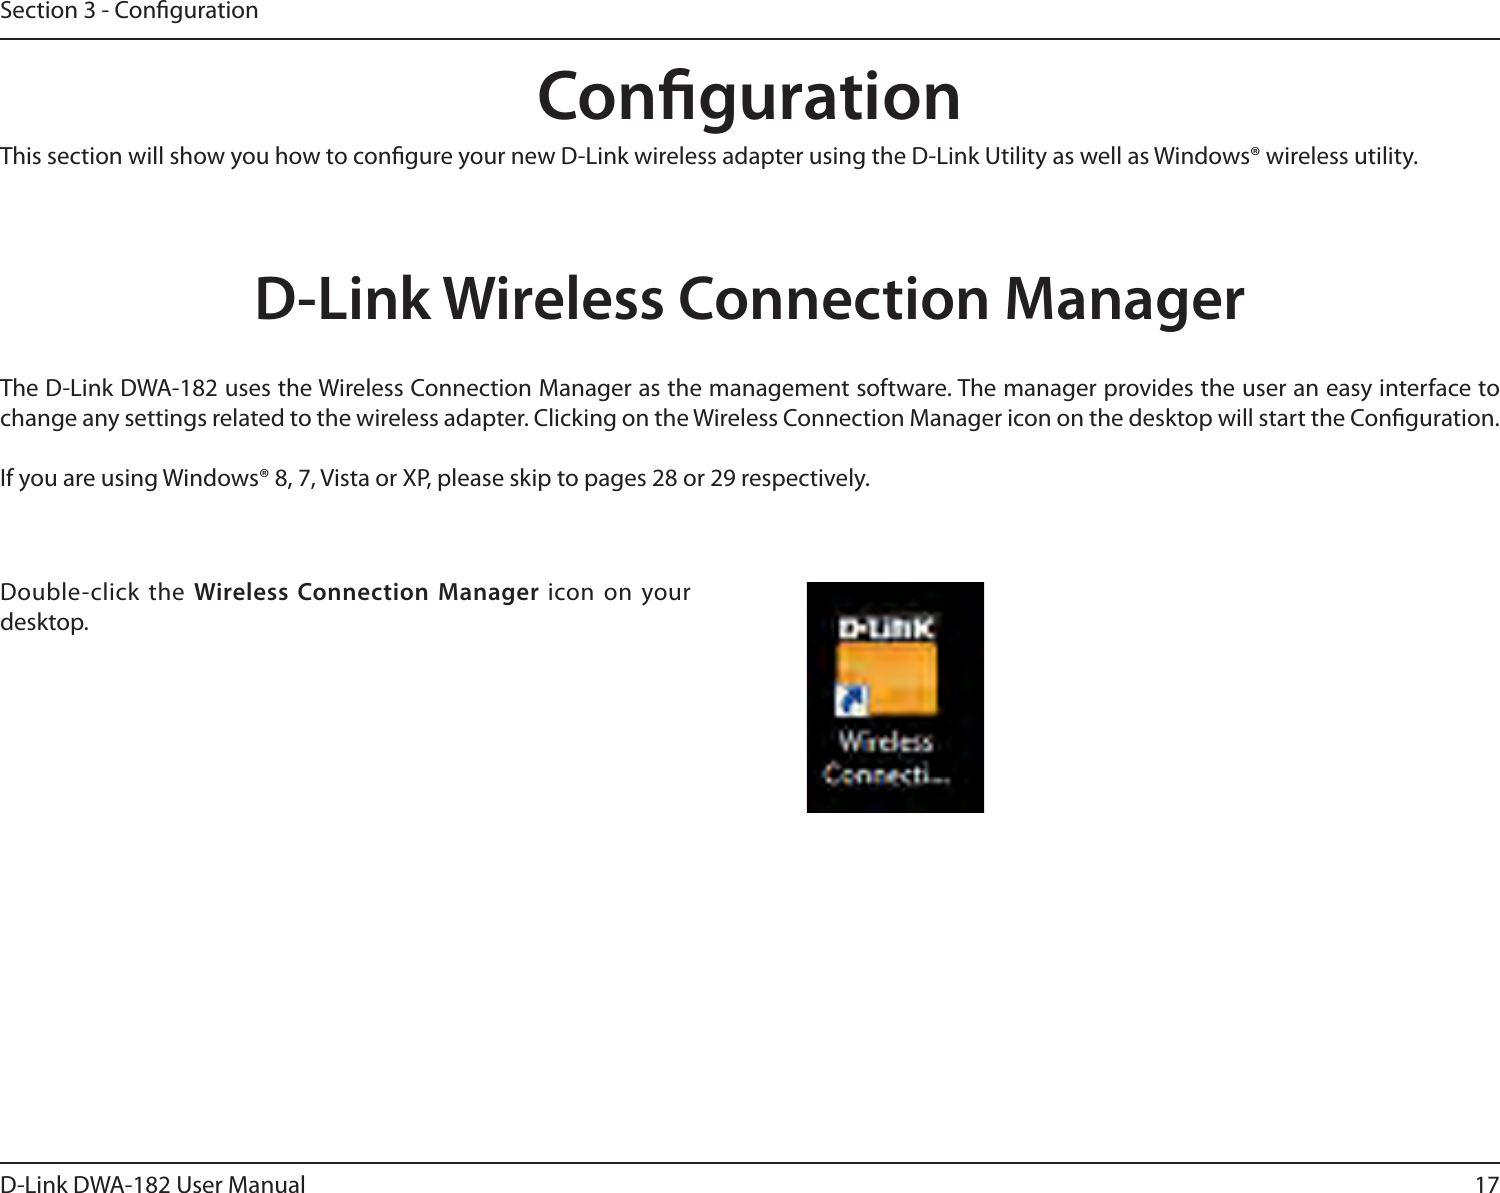 17D-Link DWA-182 User ManualSection 3 - CongurationCongurationThis section will show you how to congure your new D-Link wireless adapter using the D-Link Utility as well as Windows® wireless utility.D-Link Wireless Connection ManagerThe D-Link DWA-182 uses the Wireless Connection Manager as the management software. The manager provides the user an easy interface to change any settings related to the wireless adapter. Clicking on the Wireless Connection Manager icon on the desktop will start the Conguration.If you are using Windows® 8, 7, Vista or XP, please skip to pages 28 or 29 respectively.Double-click the Wireless Connection Manager icon on  your desktop.